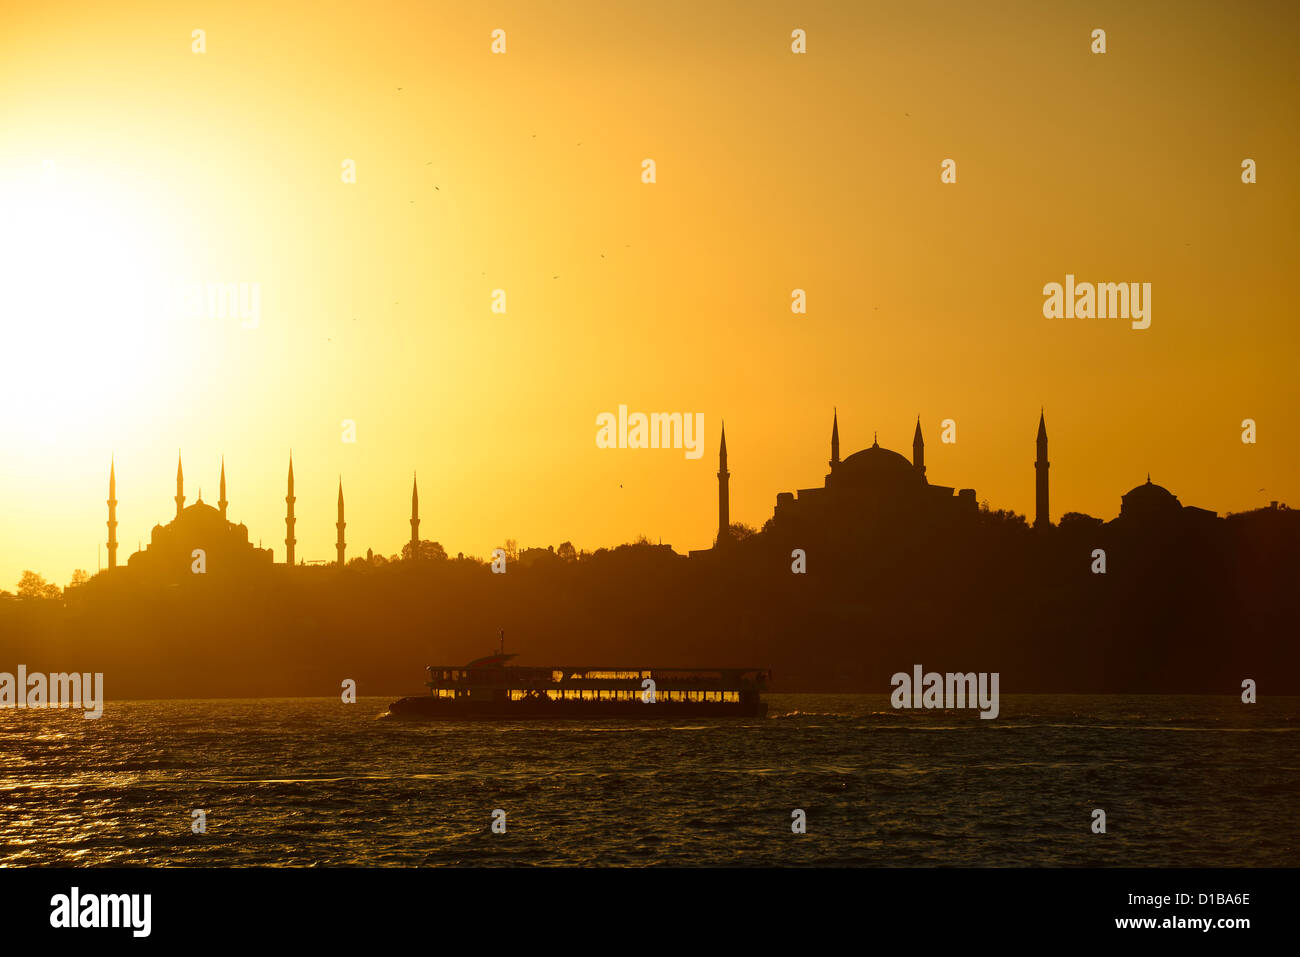 Blue Mosque and Hagia Sophia minarets silhouettes at sundown over the Bosphorus with backlit boat Istanbul Turkey Stock Photo